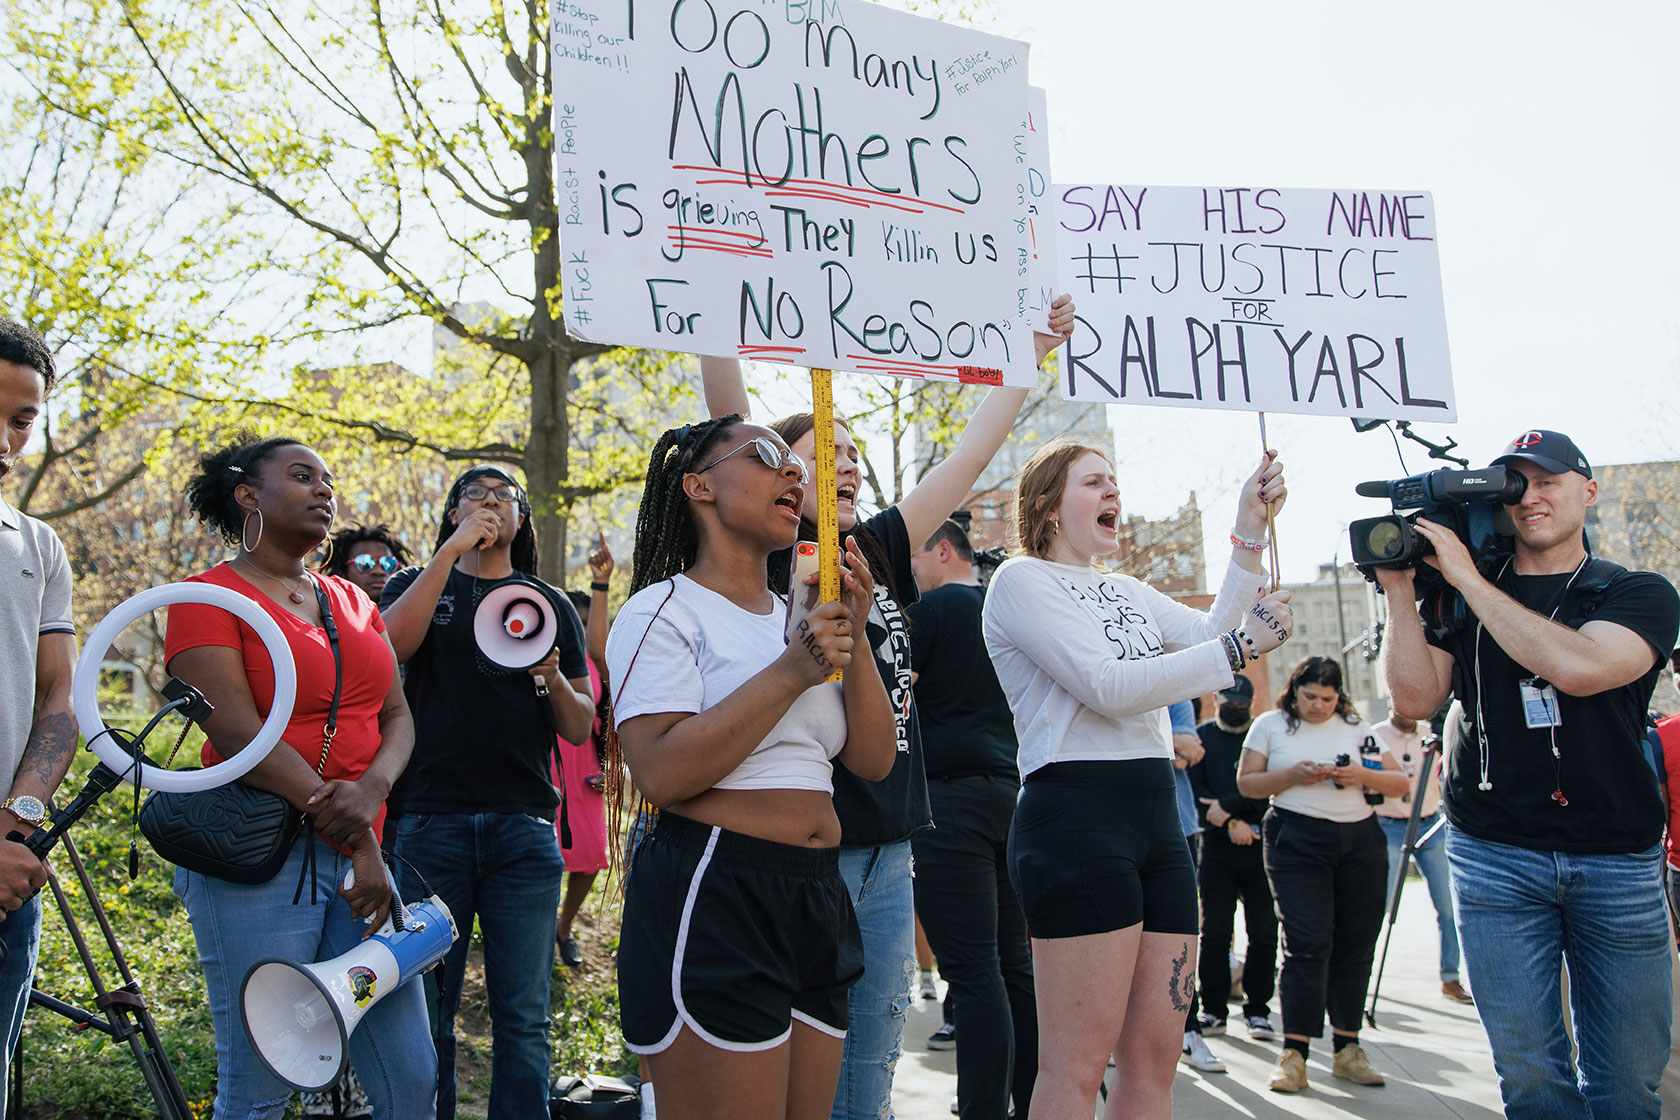 Protesters attend a rally for Ralph Yarl in Kansas City, Missouri.